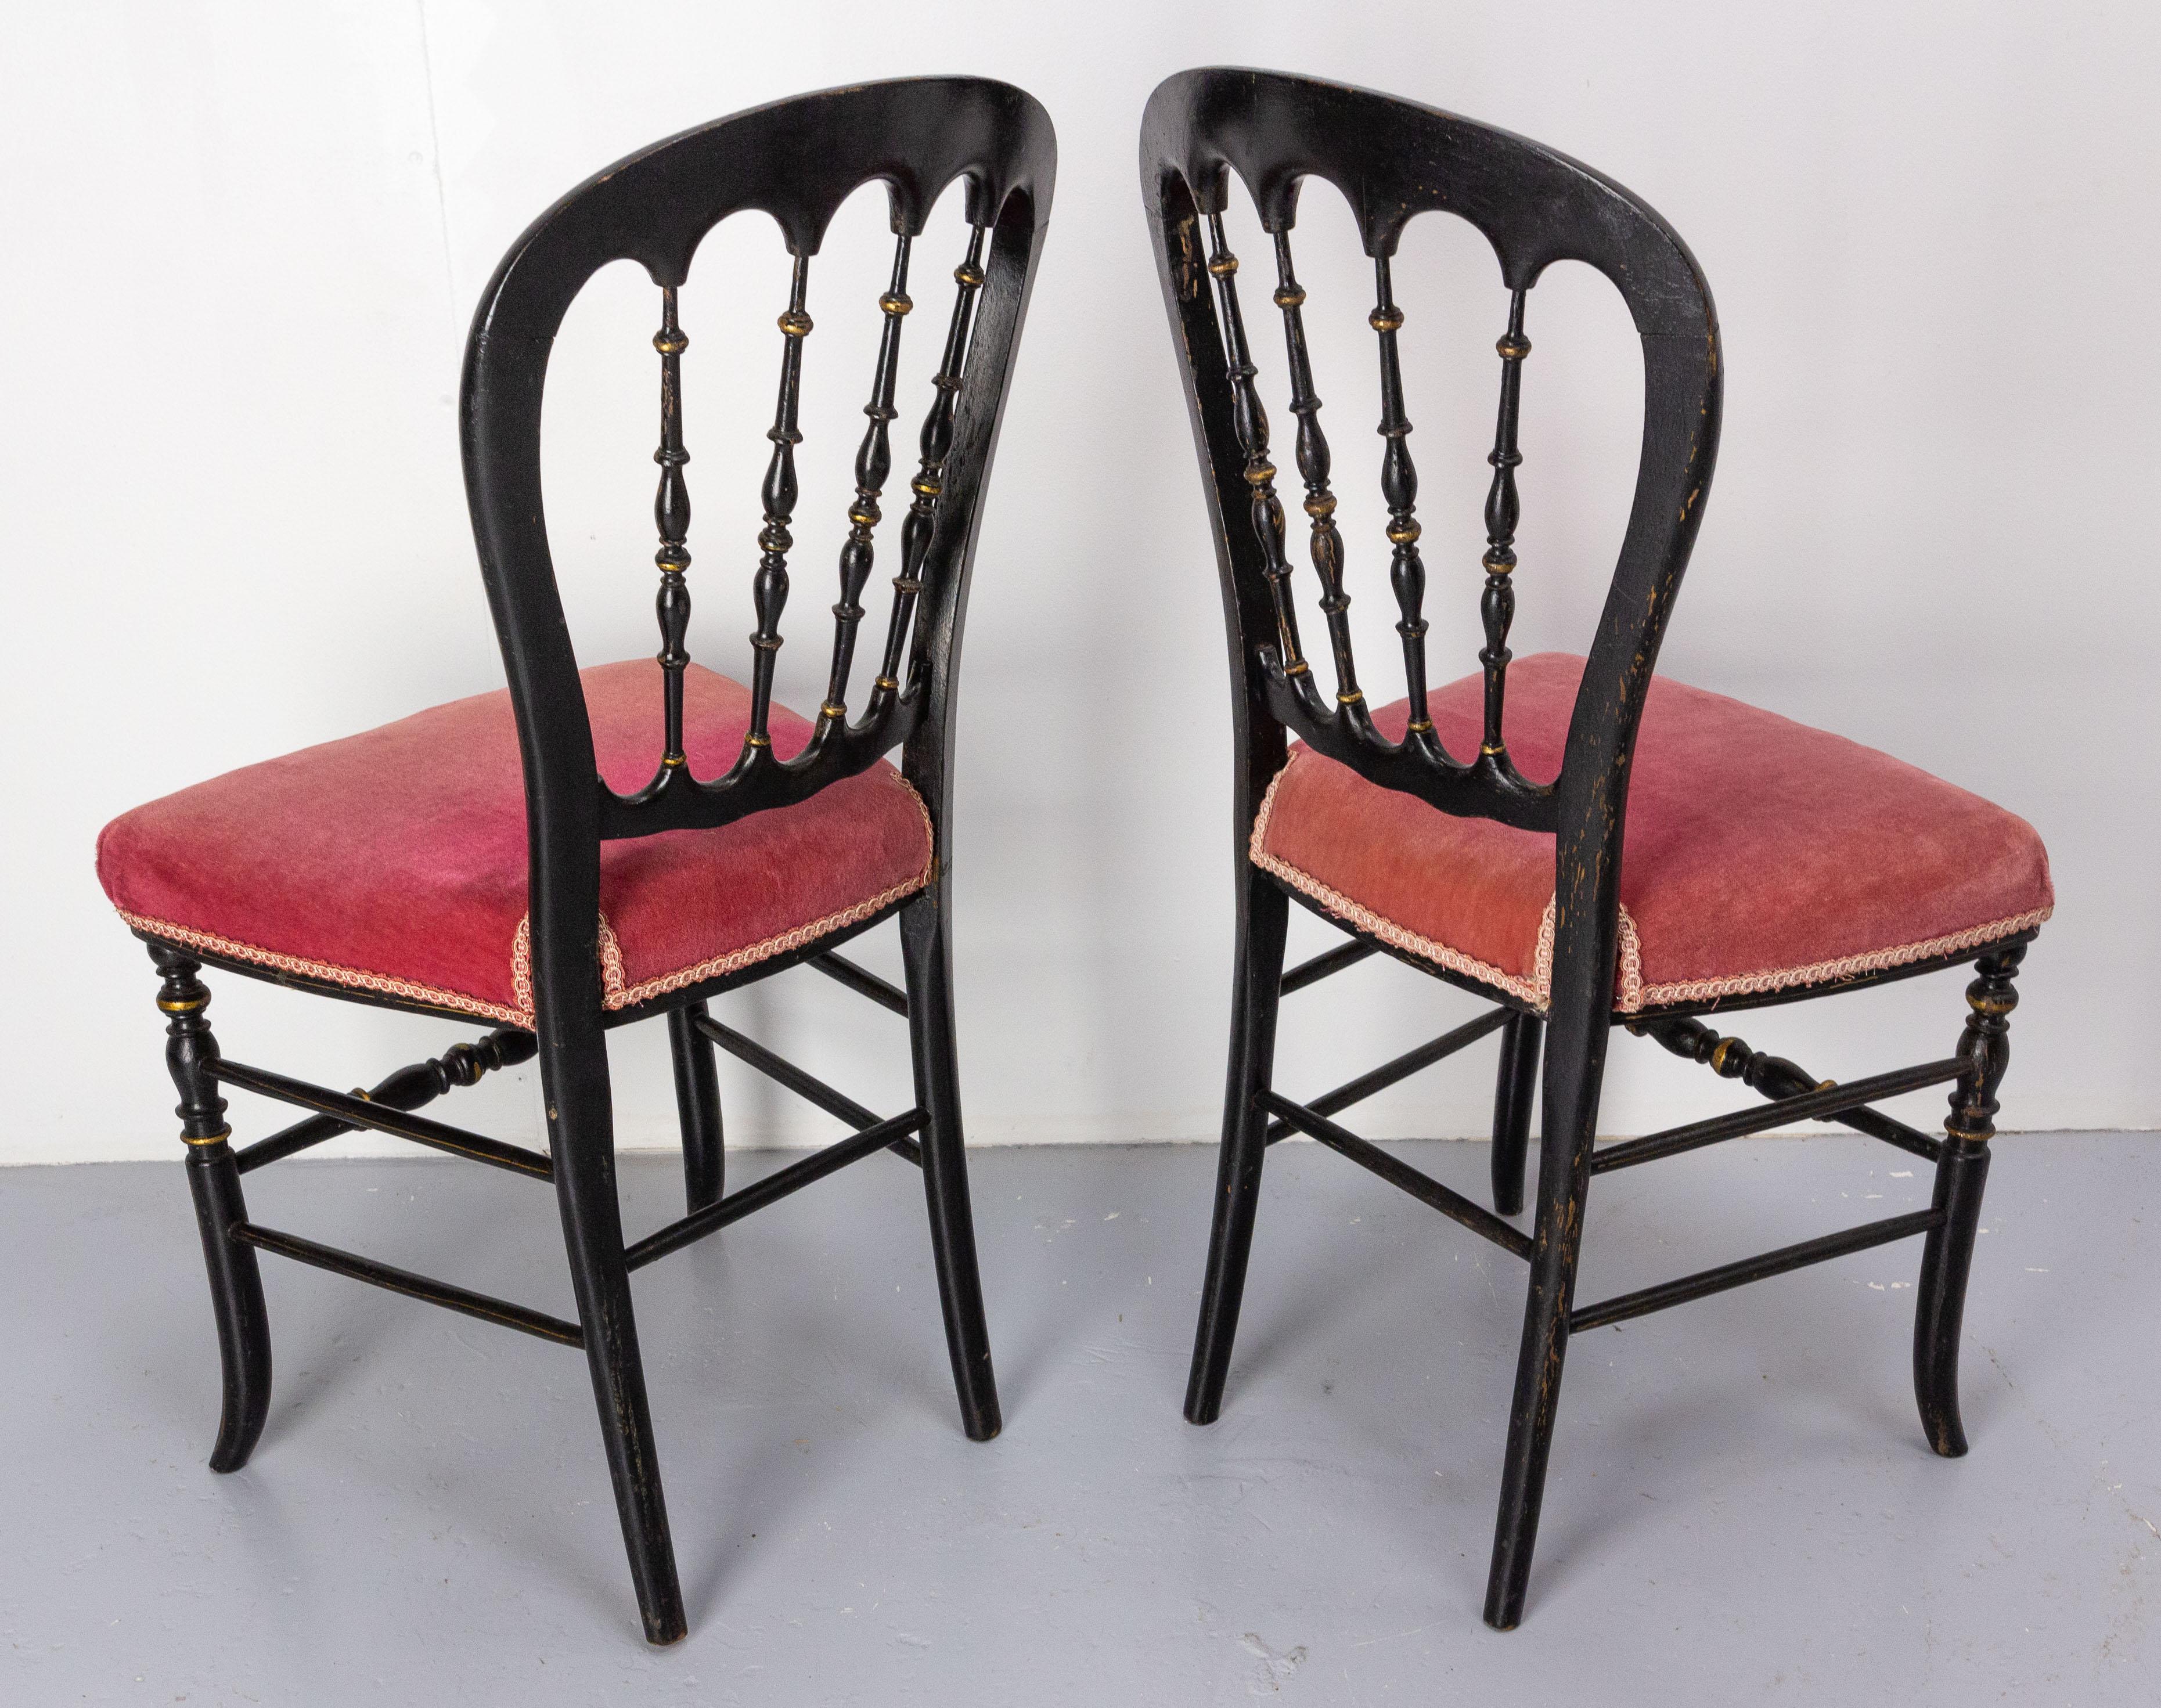 Pair of Napoleon III Chairs Fabric and Painted Wood, French, Late 19th Century For Sale 3